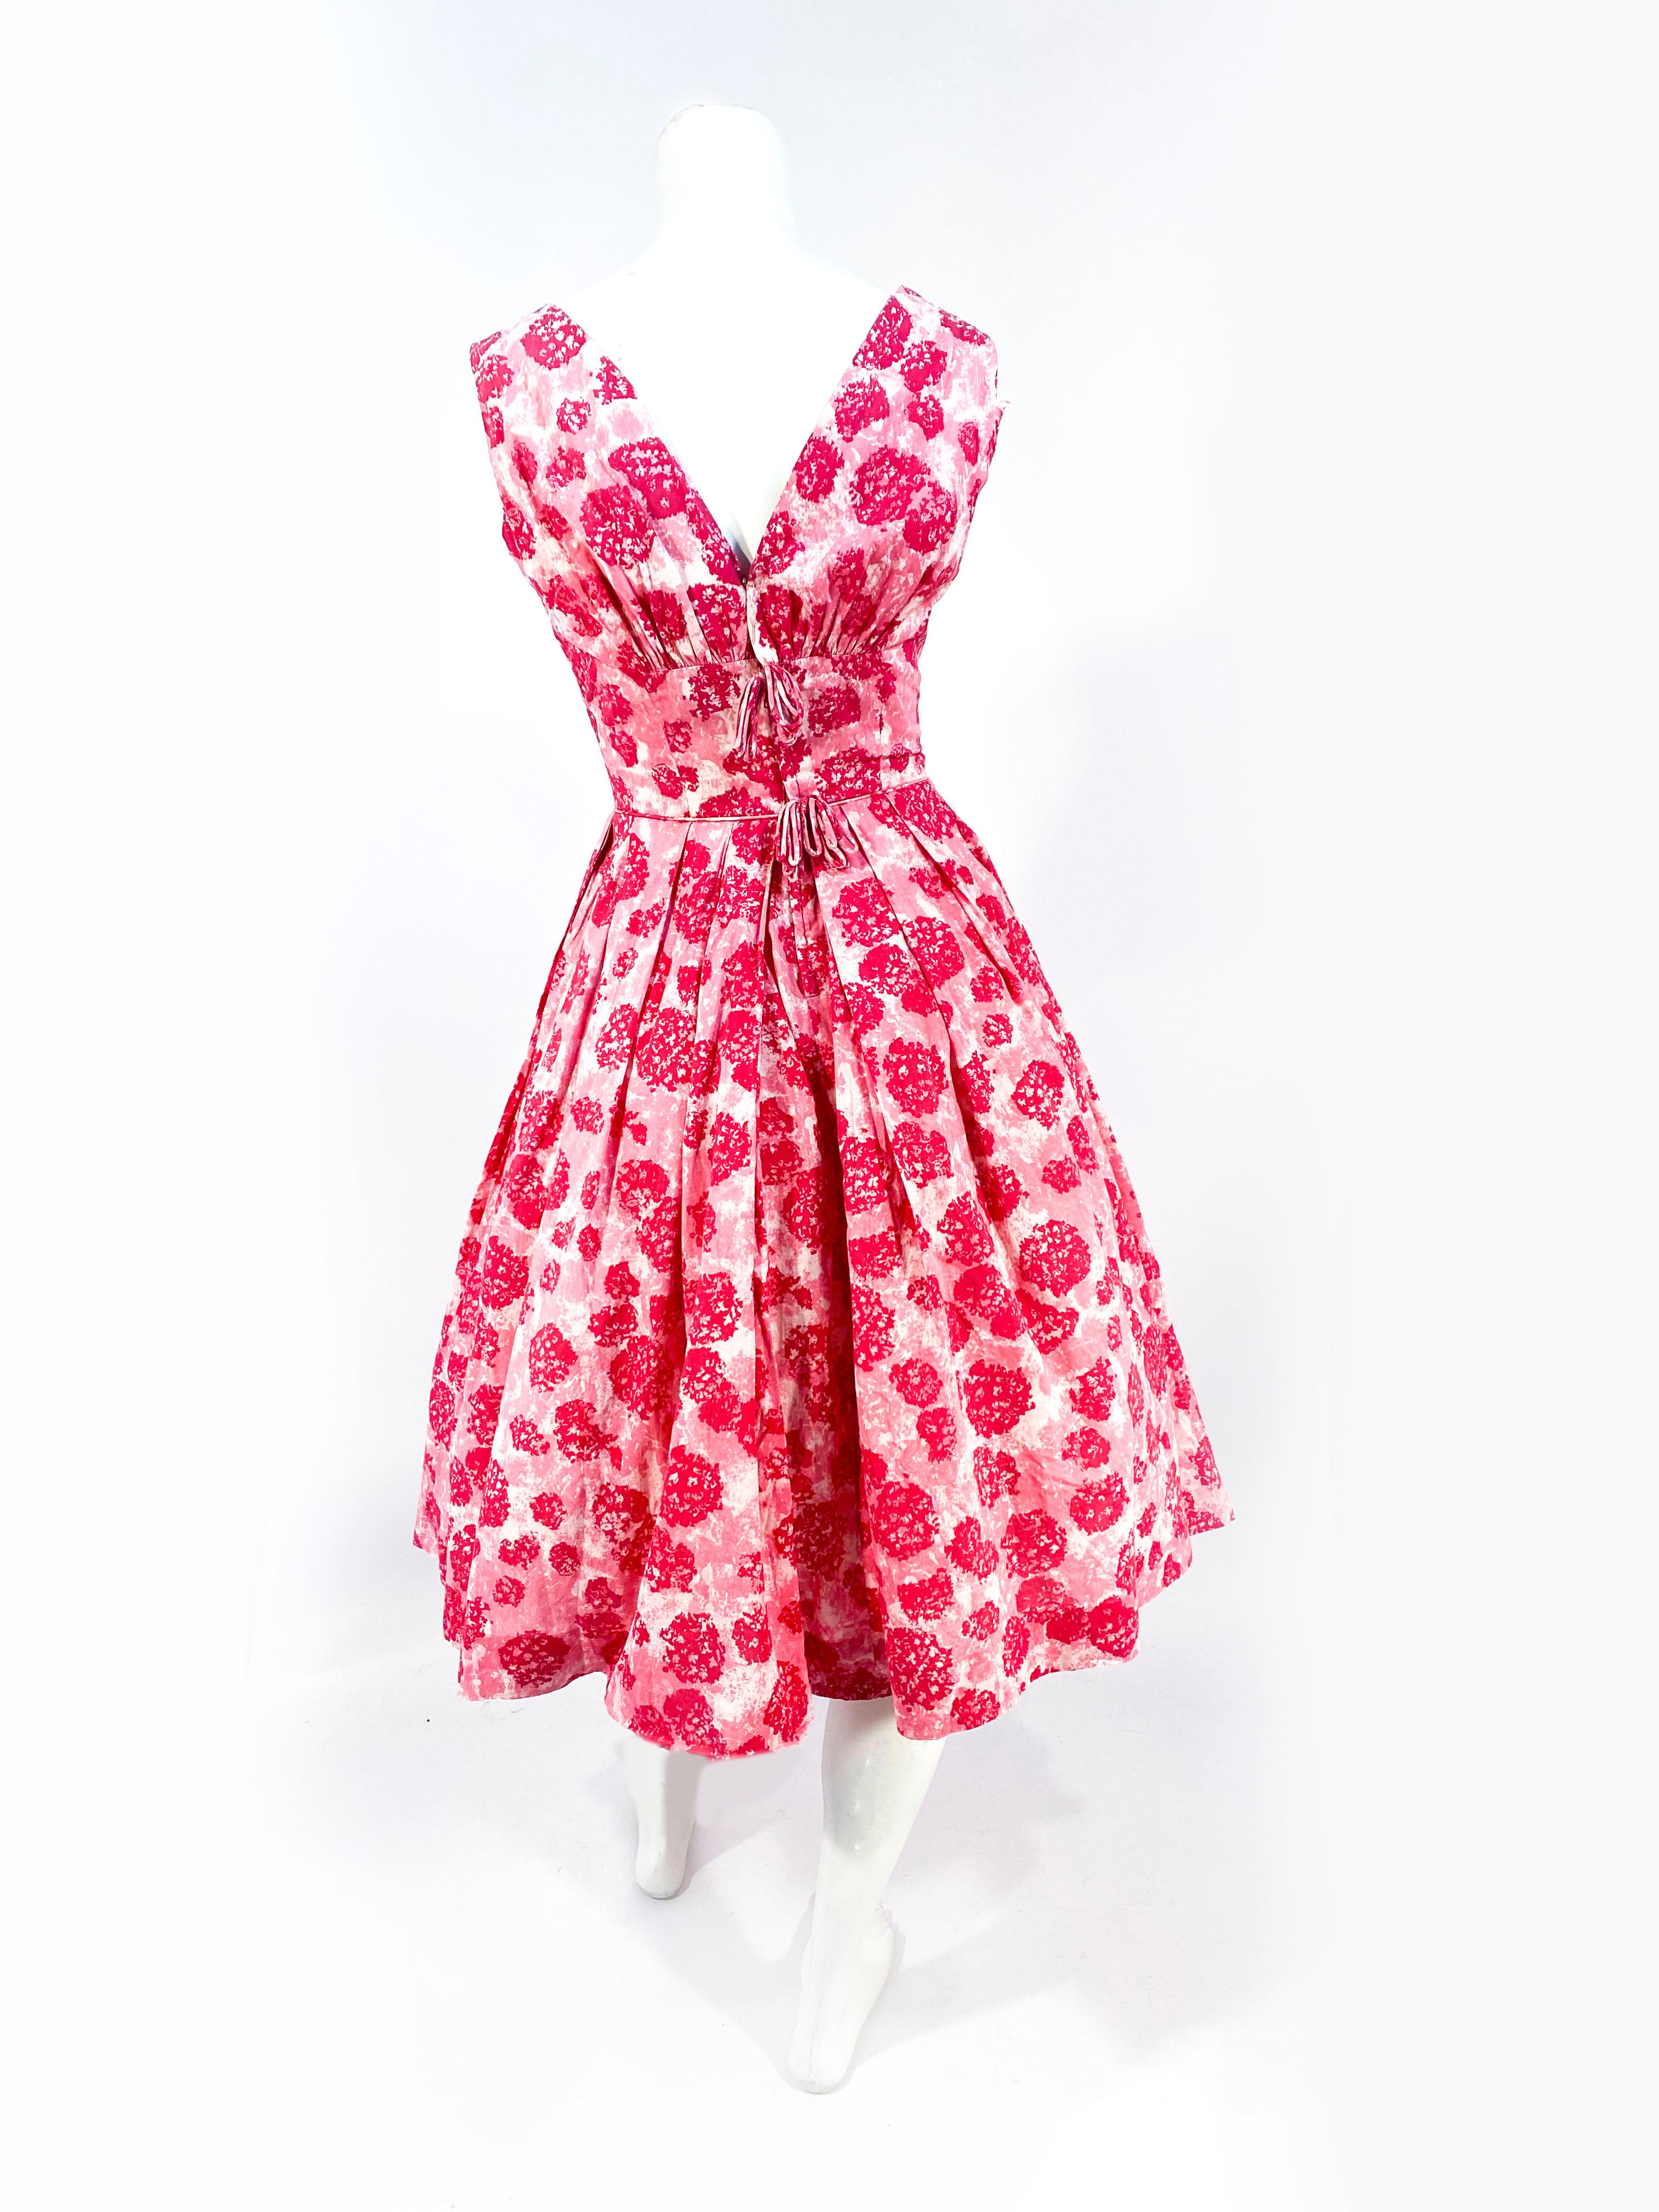 1950s/1960s Pink Cotton Day Dress with Abstract Floral Print 1